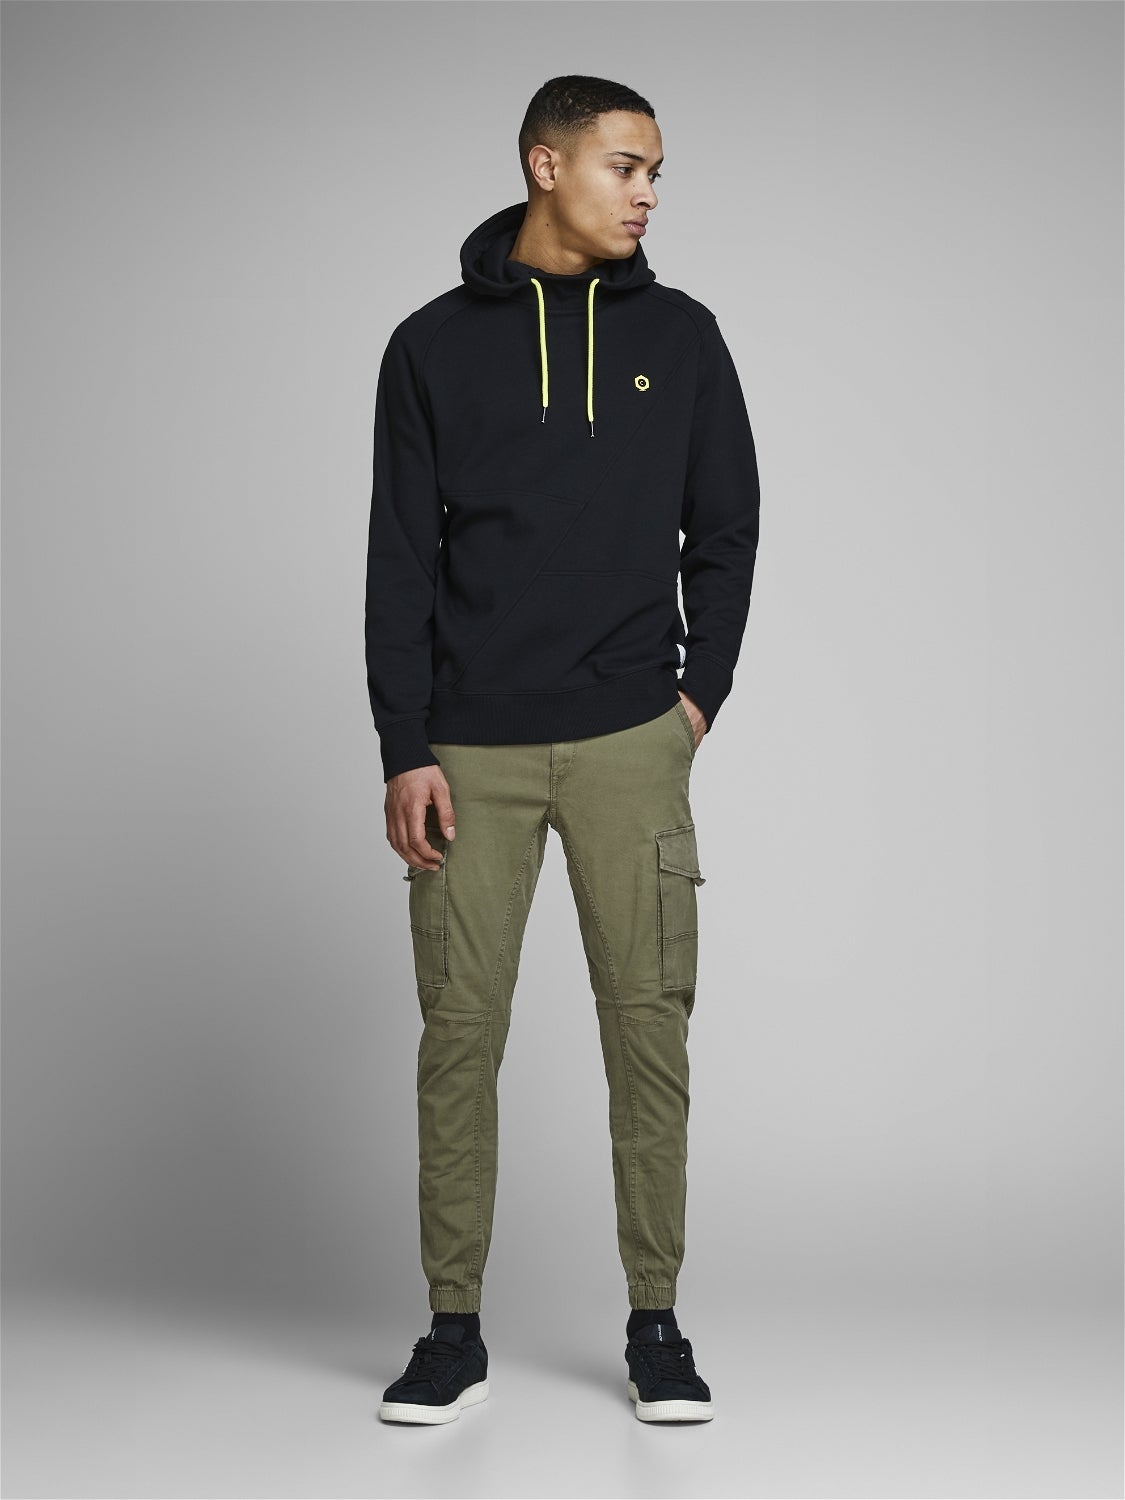 Jack & Jones Men's 12142525 Pants, Color: Forest Night, Size: 29 : Buy  Online at Best Price in KSA - Souq is now Amazon.sa: Fashion